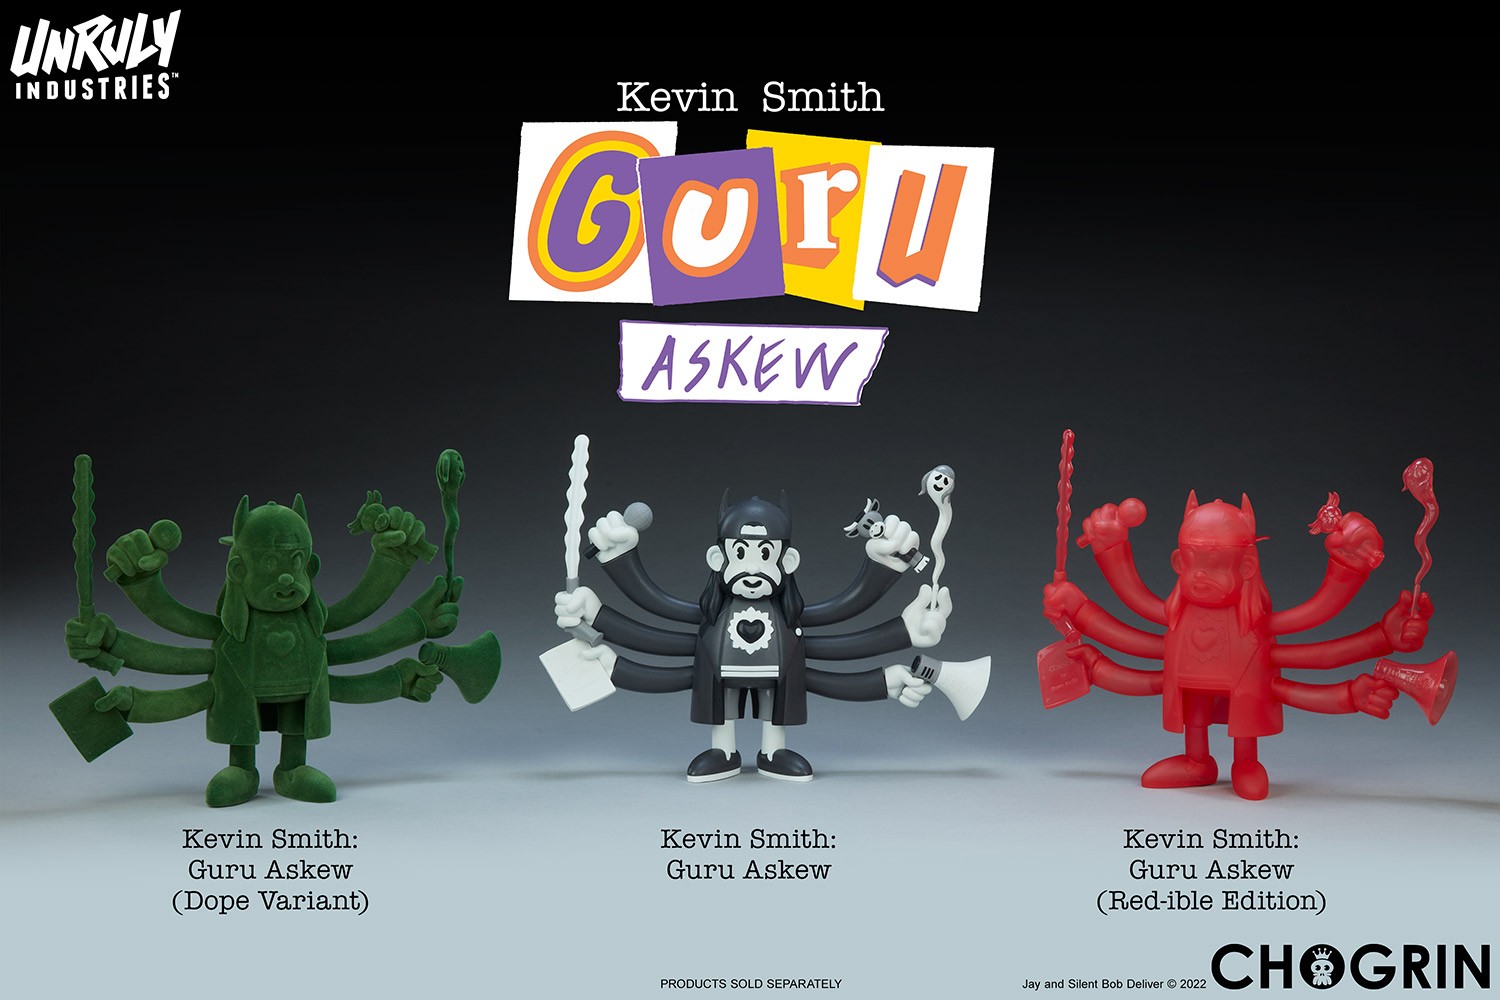 Kevin Smith: Guru Askew (Dope Variant) Collector Edition (Prototype Shown) View 19